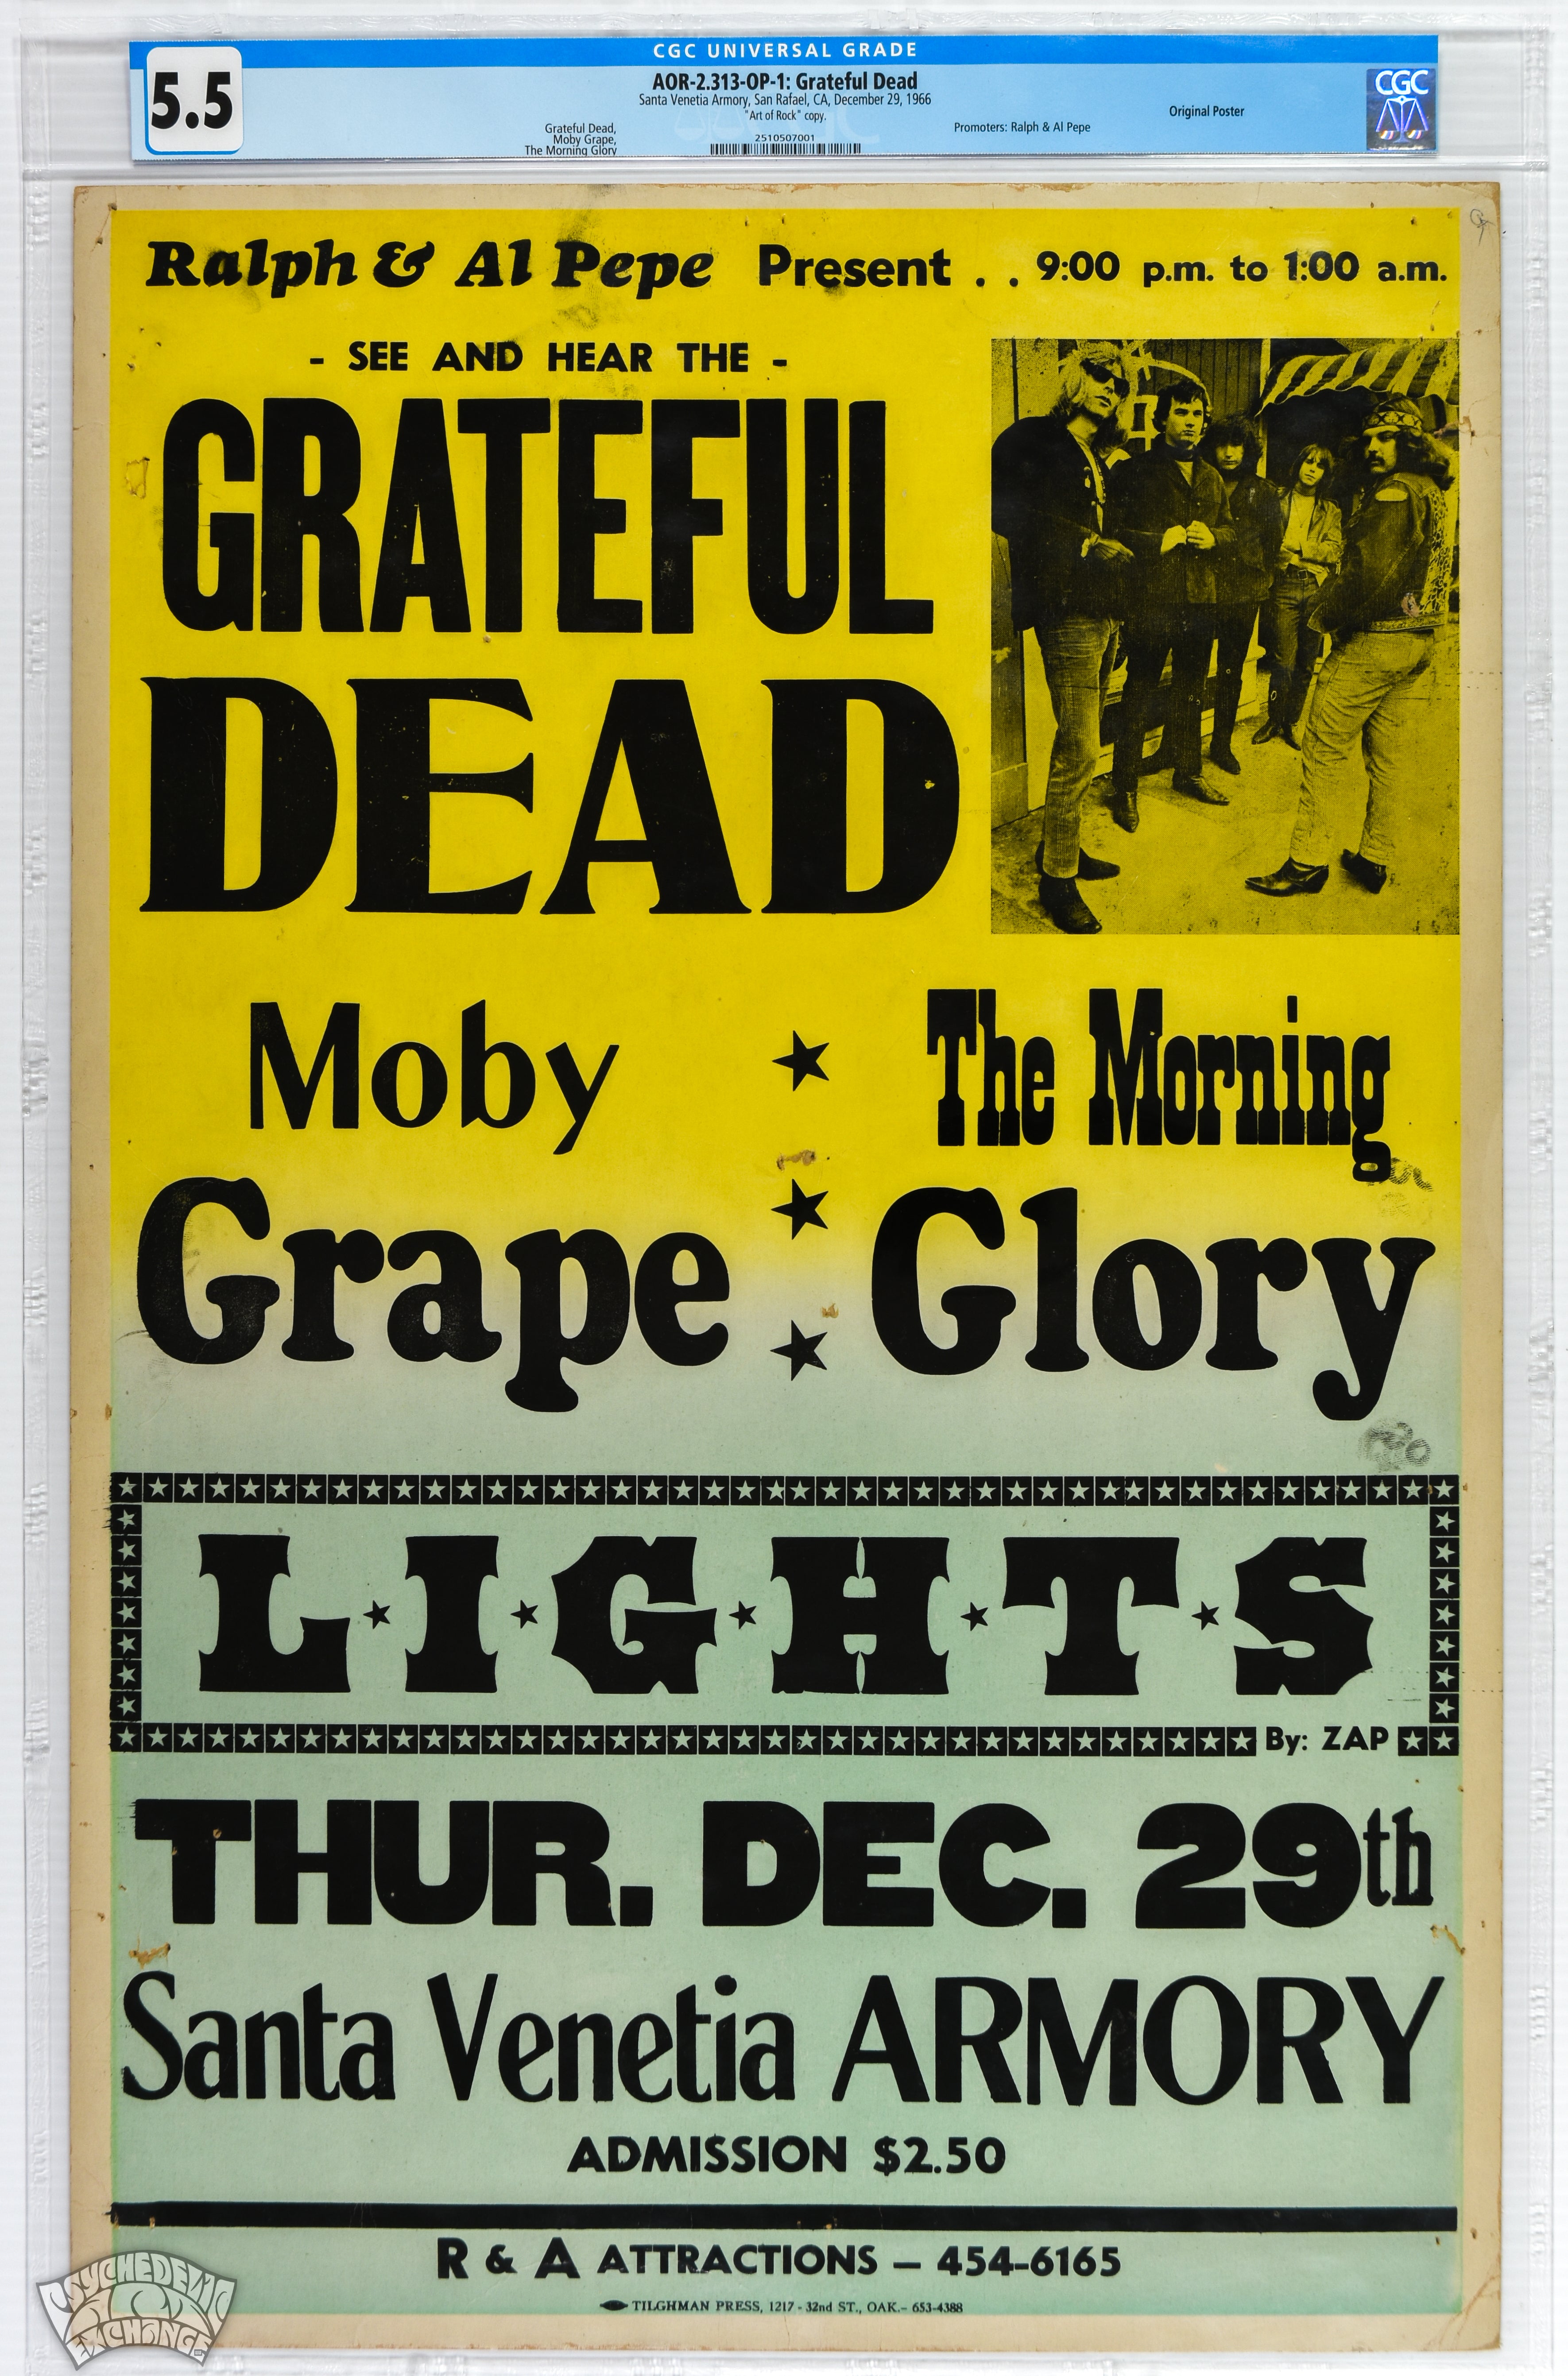 Up For Auction First Ever CGC Certified Copy of Early Grateful Dead Scarce Cardboard Poster